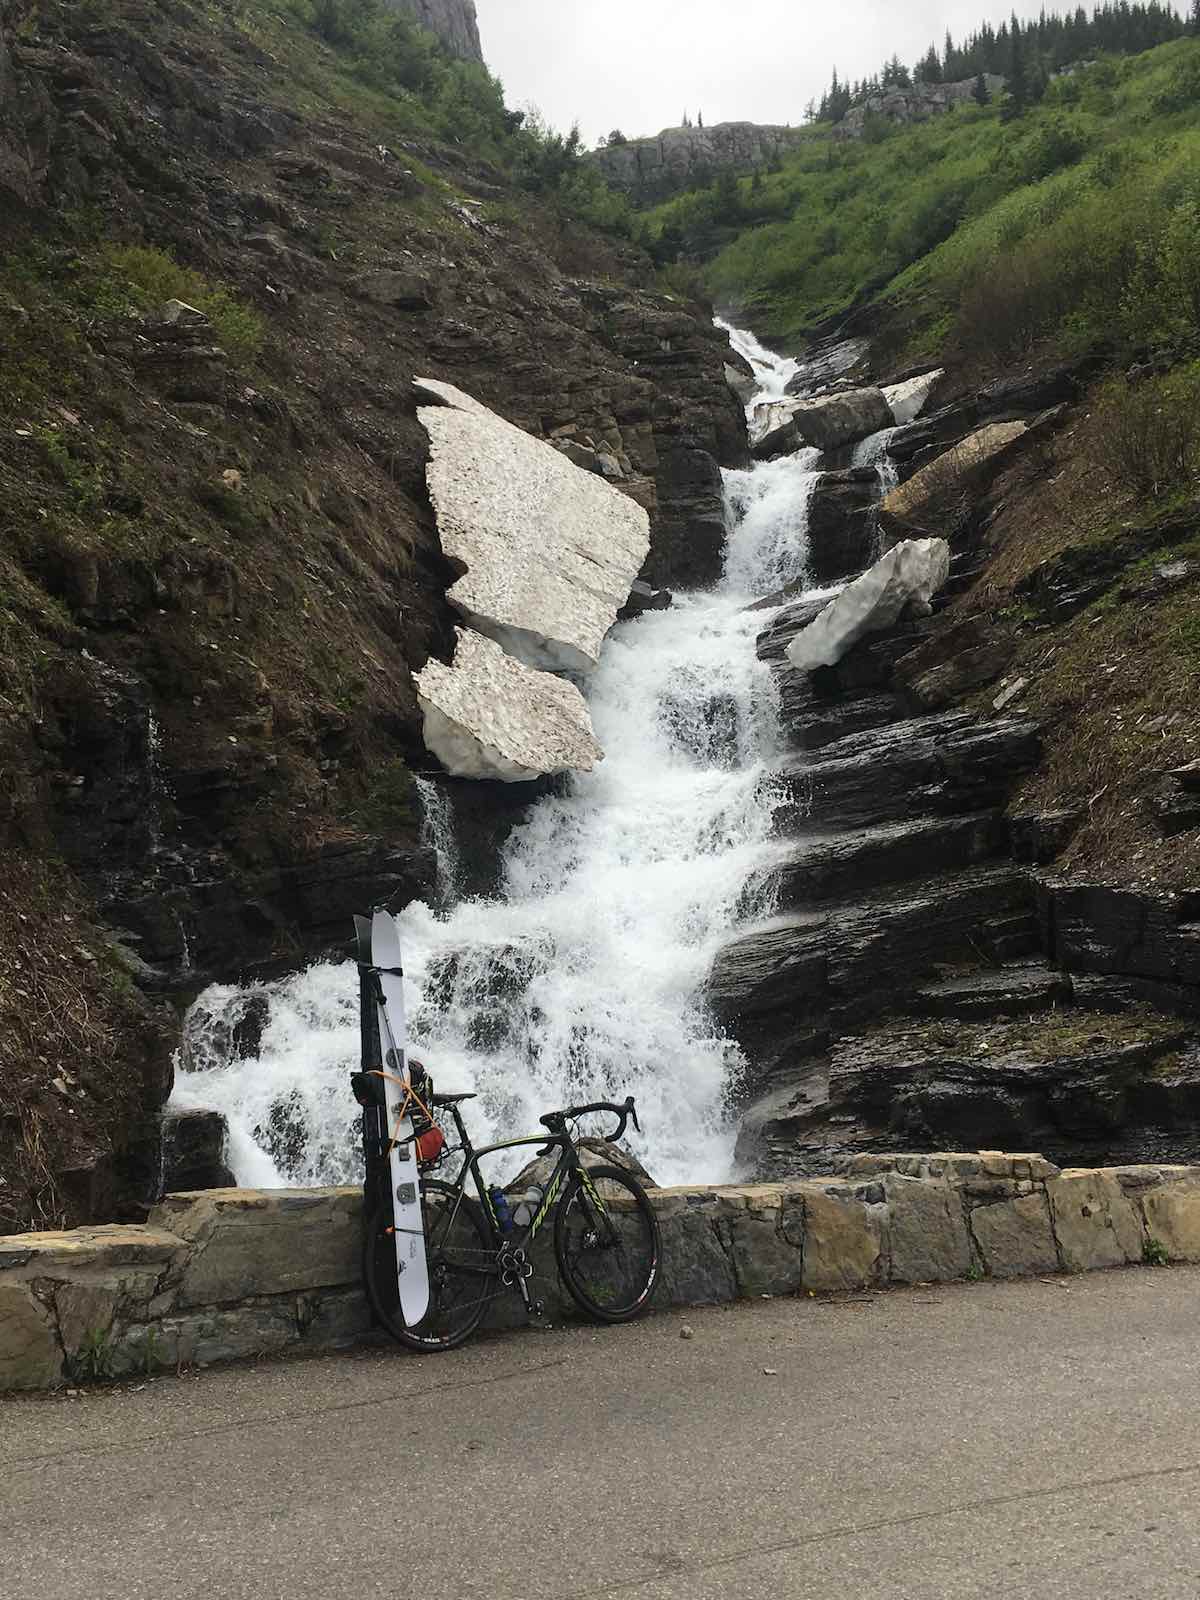 bikerumor pic of the day, riding bikes up the sun road in Glacier National Park in Montana. Skis included.